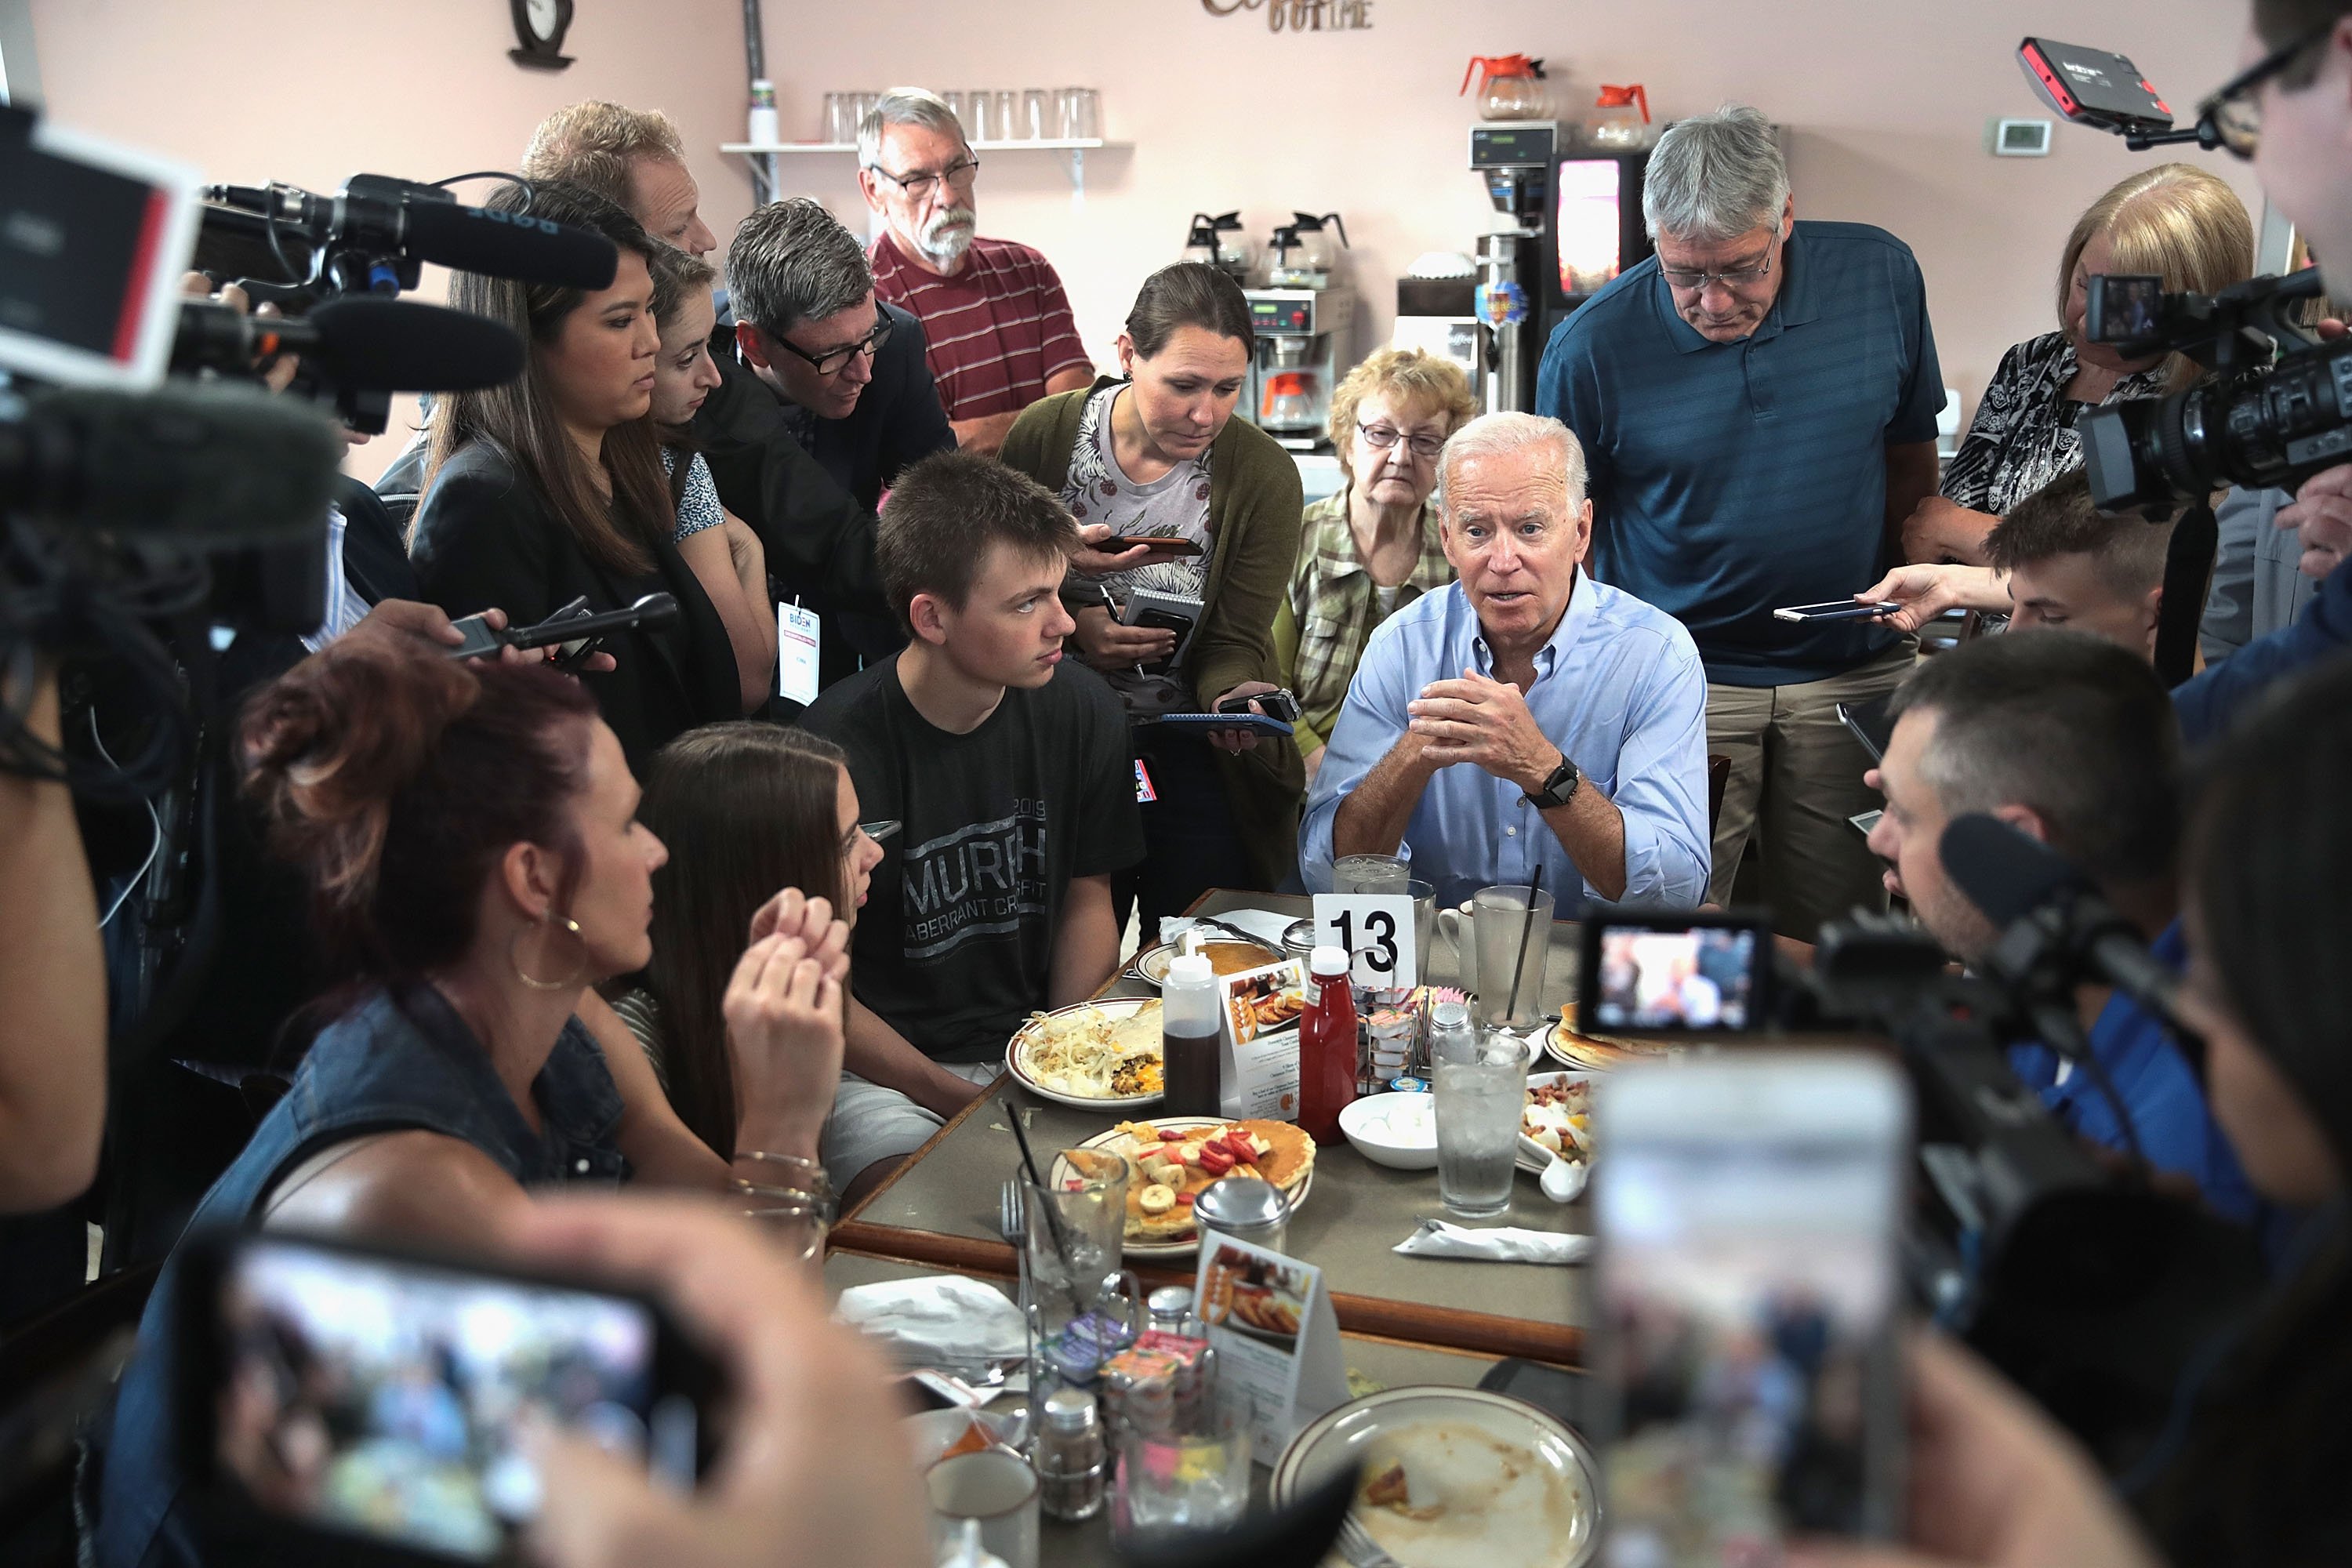 Democratic presidential candidate and former U.S. vice president Joe Biden speaks to diners at the Tasty Cafe during a quick campaign stop on June 12, 2019 in Eldridge, Iowa. (Photo by Scott Olson/Getty Images)